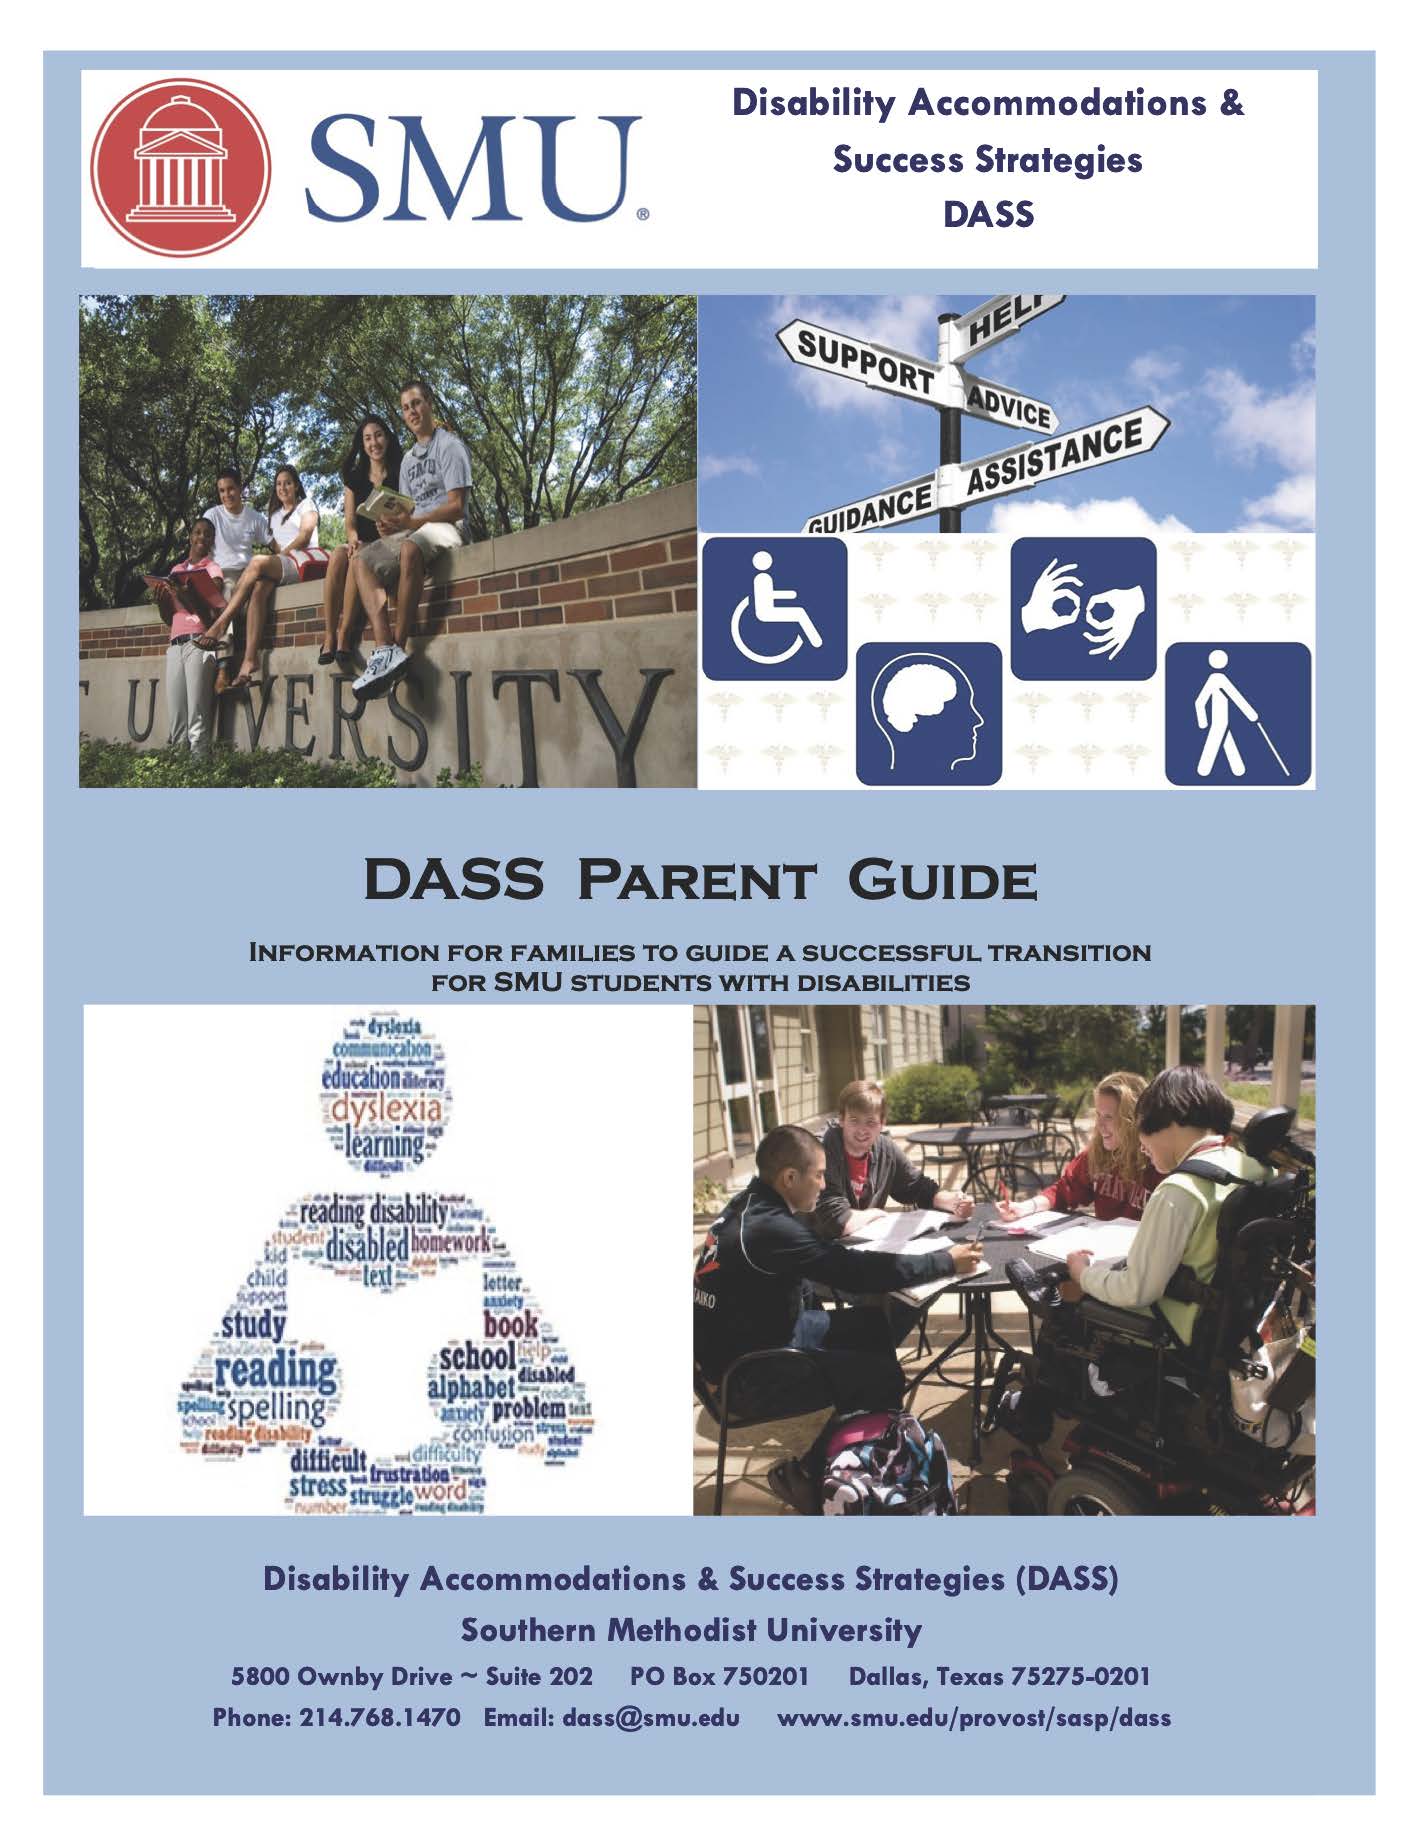 The cover of the DASS Parent Guide showing photographs of students and the title